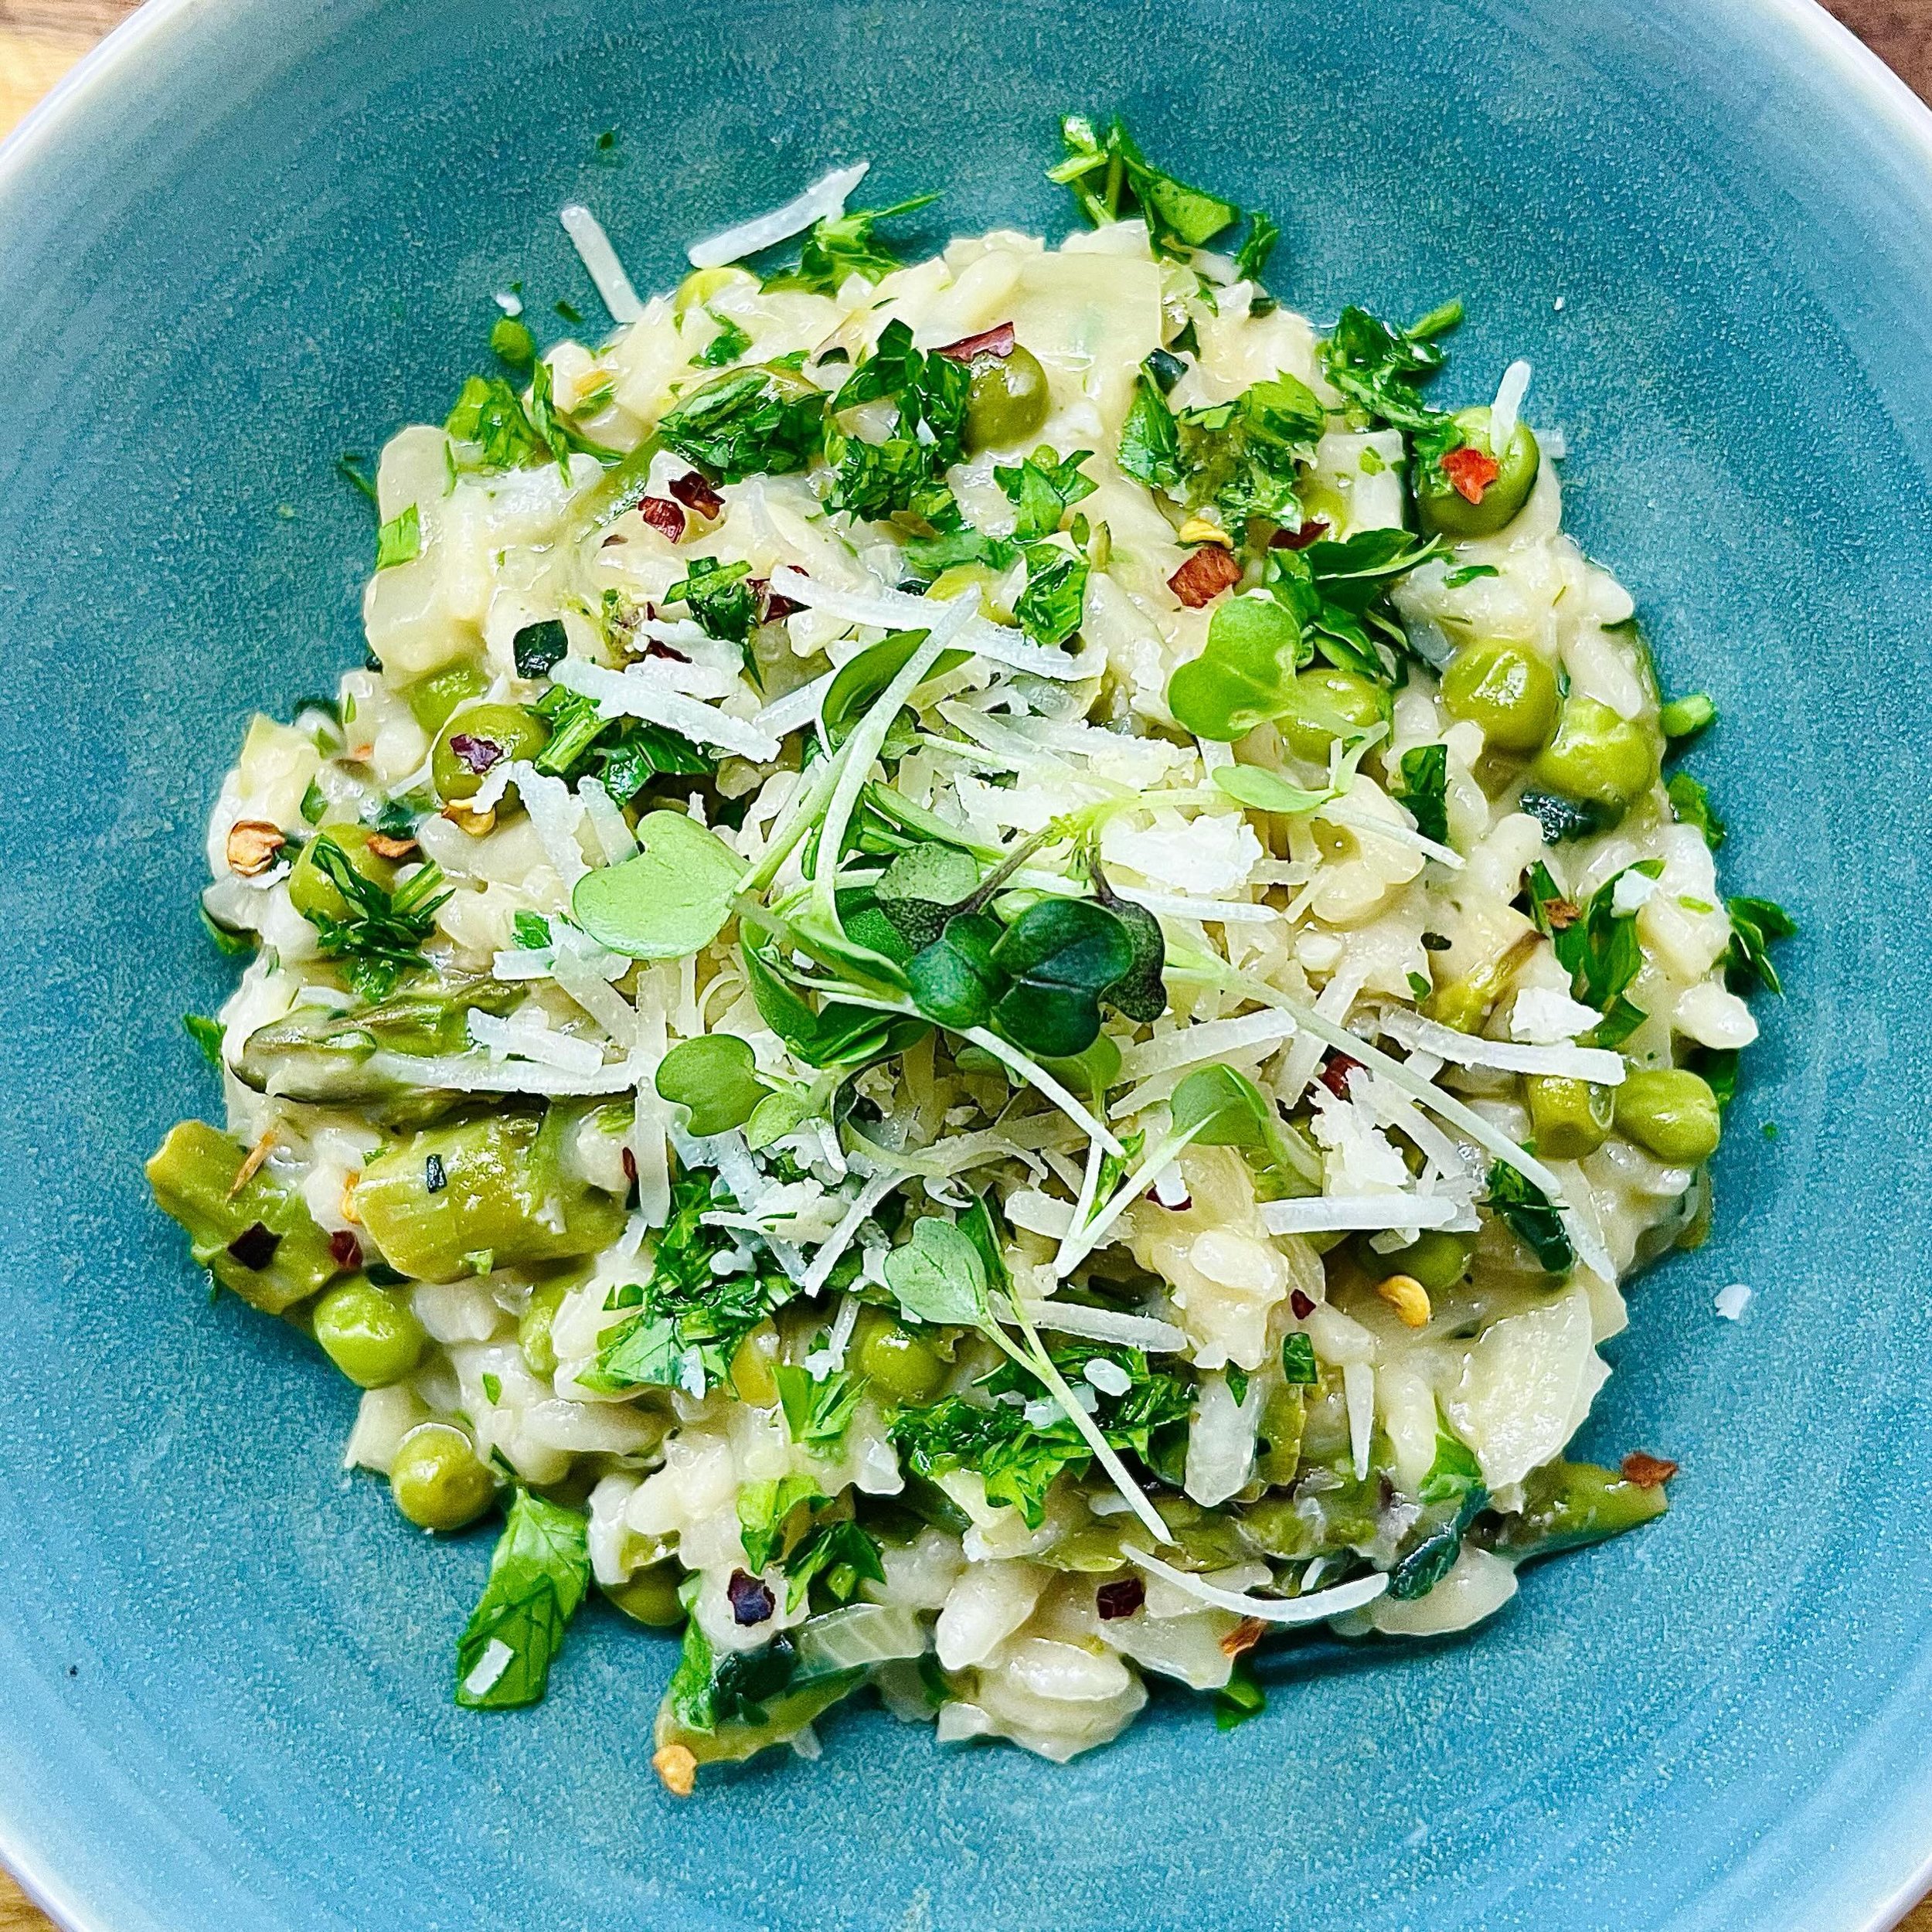 made a springy risotto with fennel, leeks, asparagus and peas with loads of parsley, tarragon, fennel fronds, lemon and microgreens